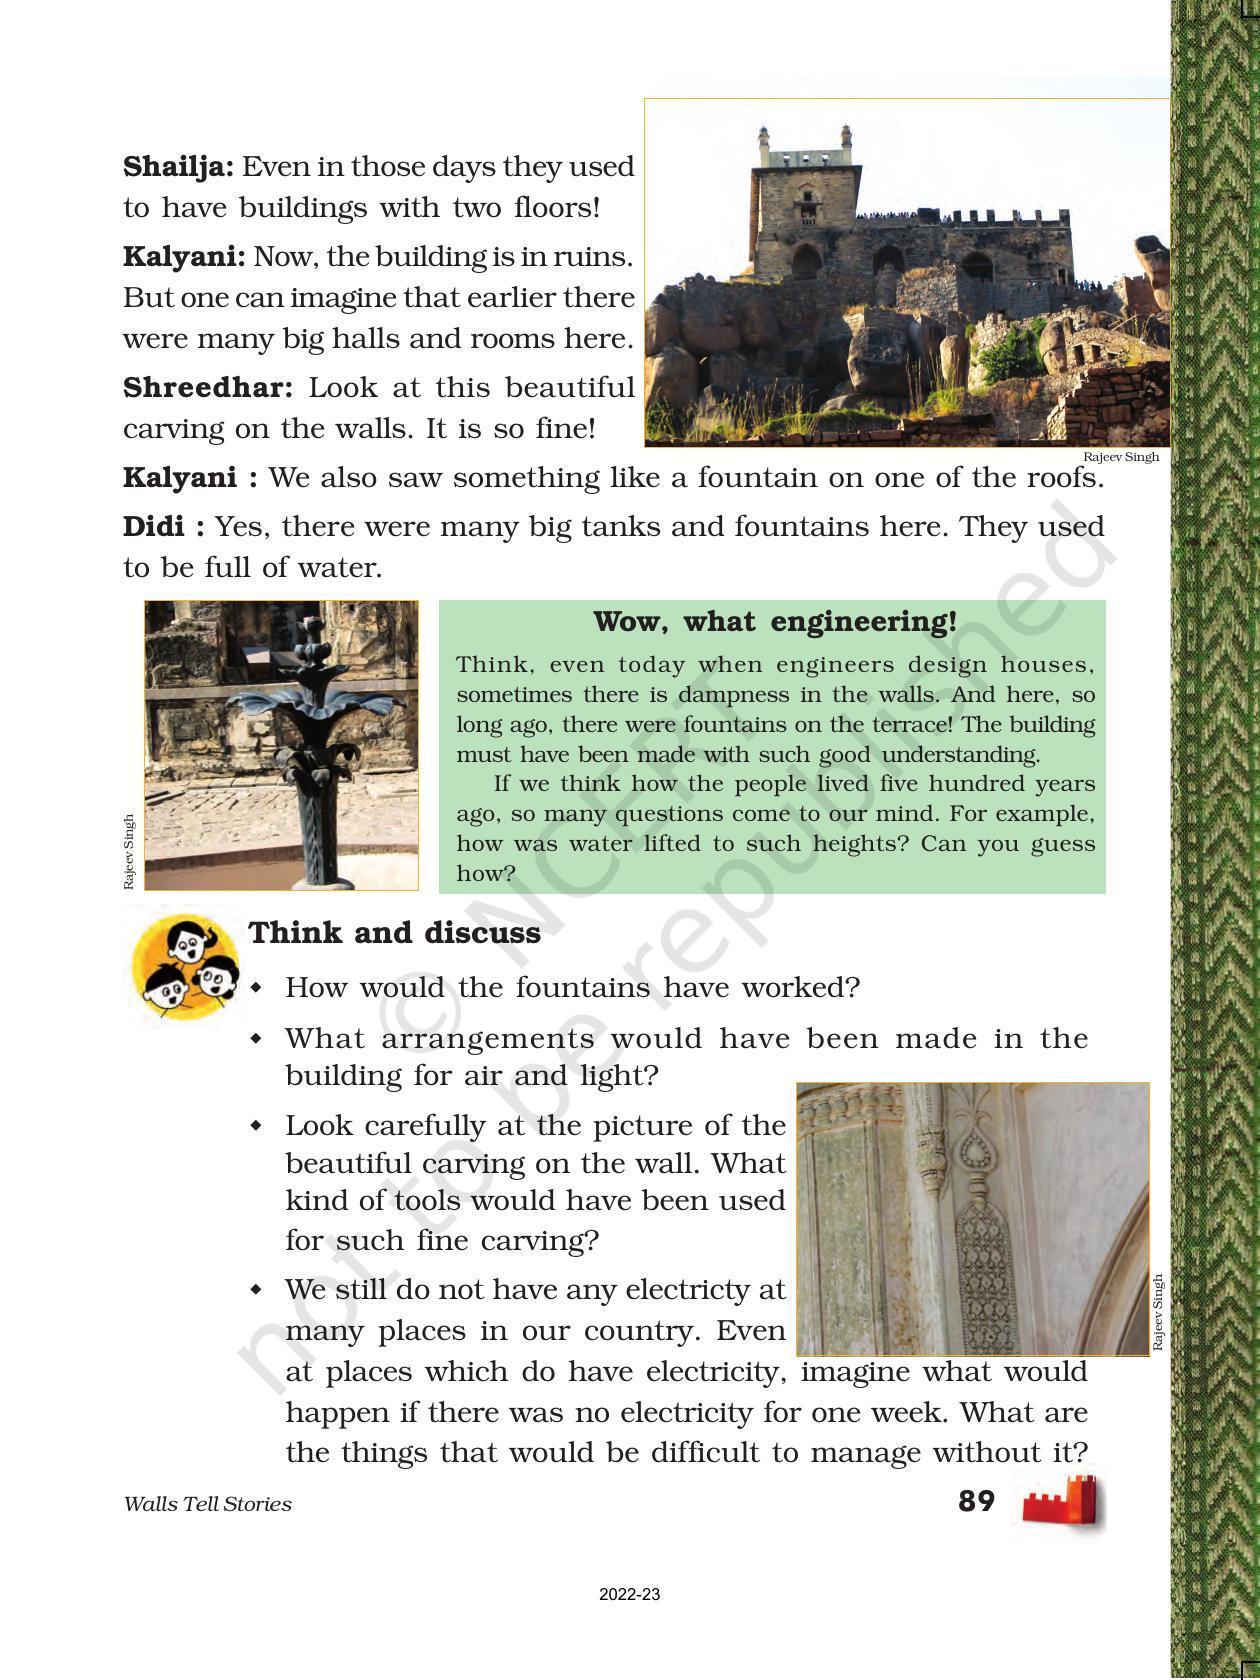 NCERT Book for Class 5 EVS Chapter 10 Walls Tell Stories - Page 3